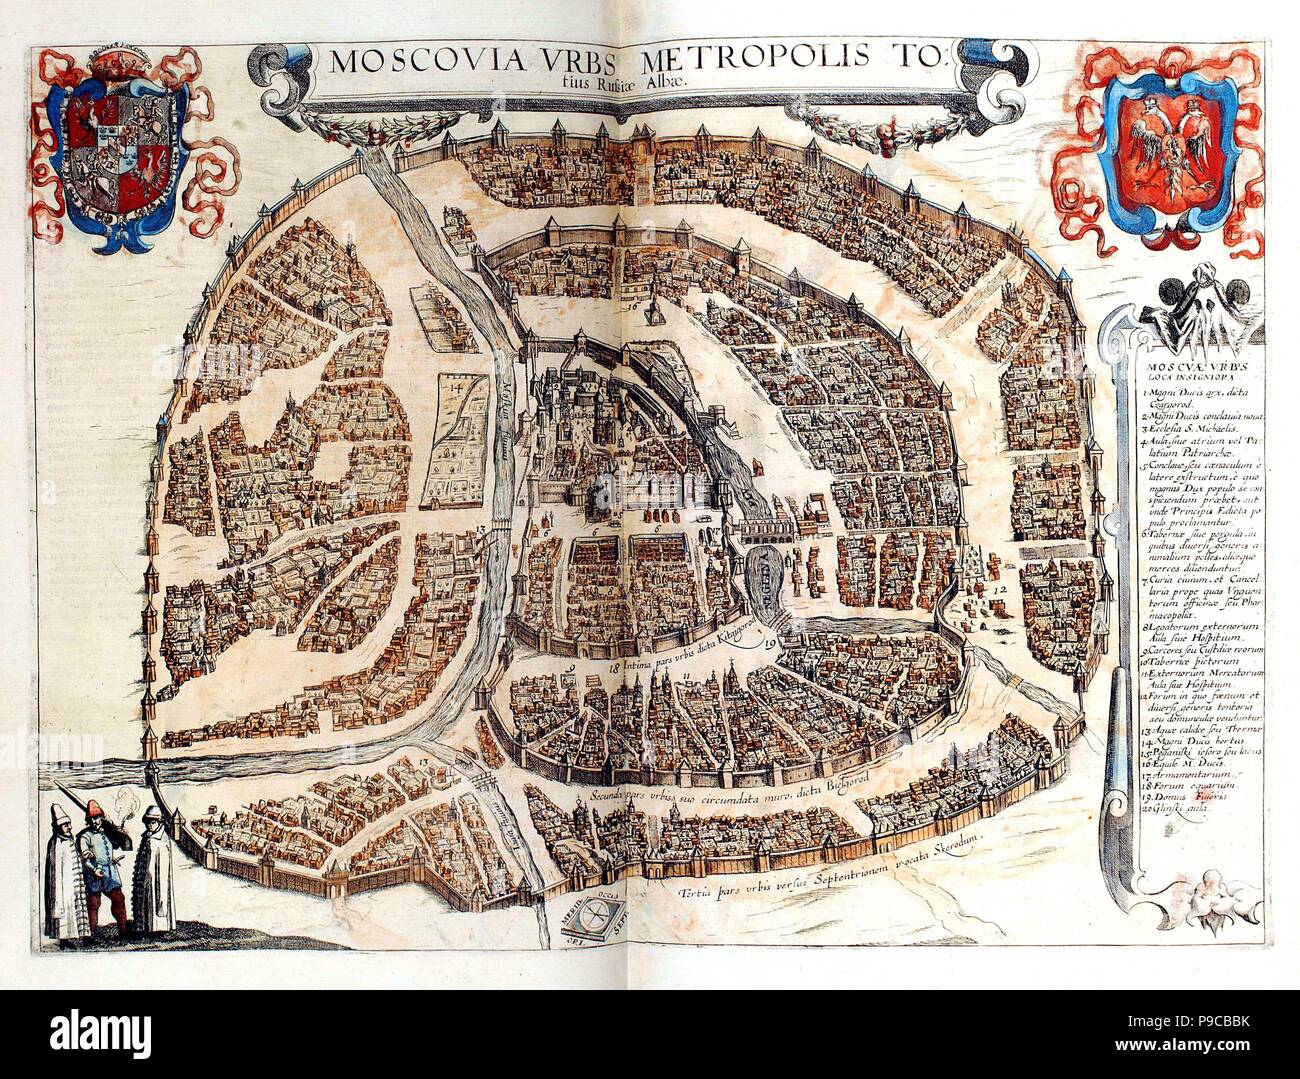 Map of Moscow. Museum: Biblioteca Centrale Nazionale, Florence. Stock Photo